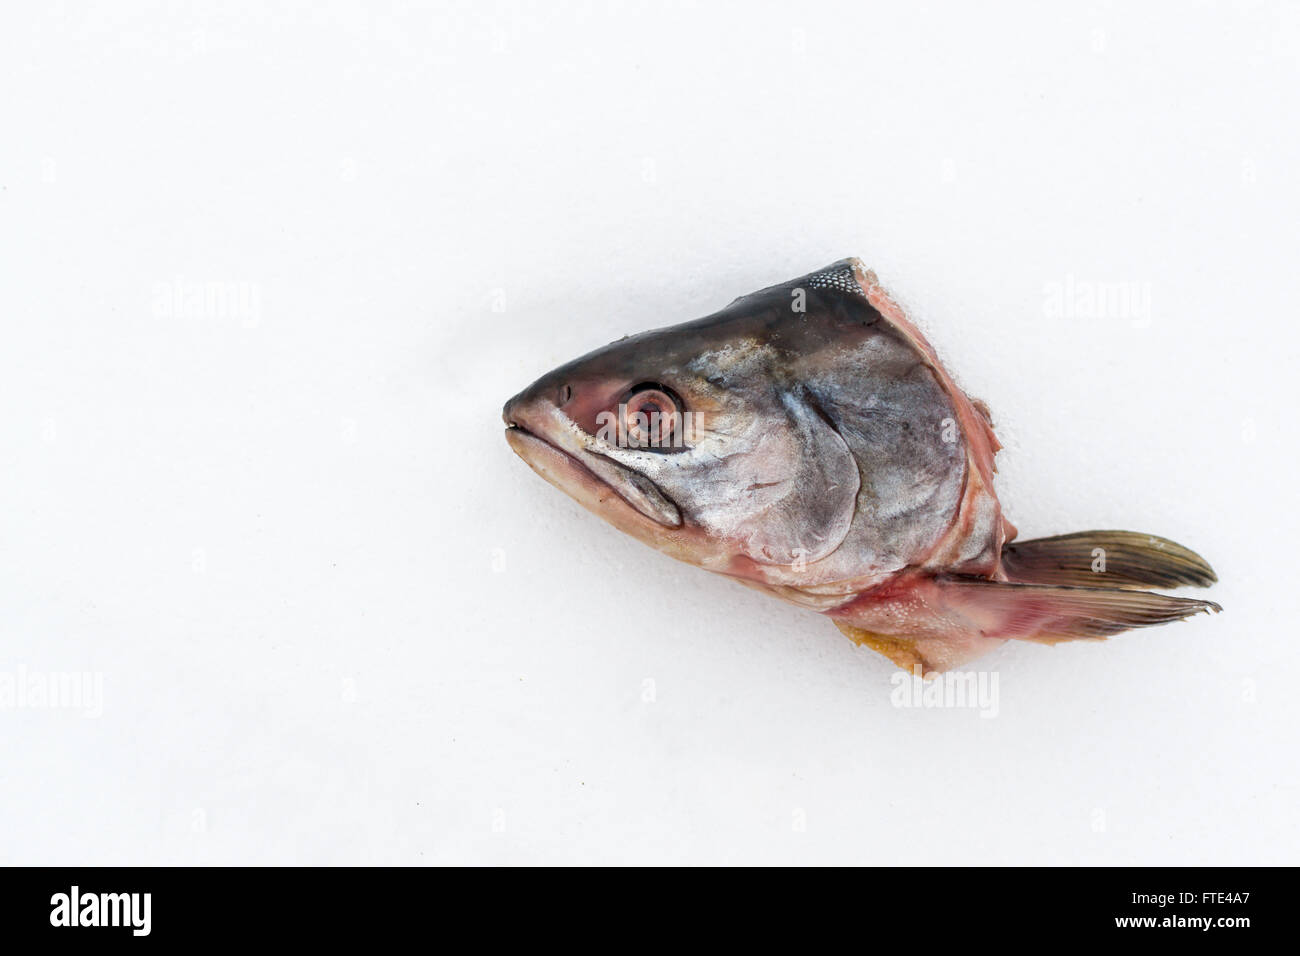 Single severed head of a raw fish cut off and left on a white snow background. Copy space area for text. Stock Photo